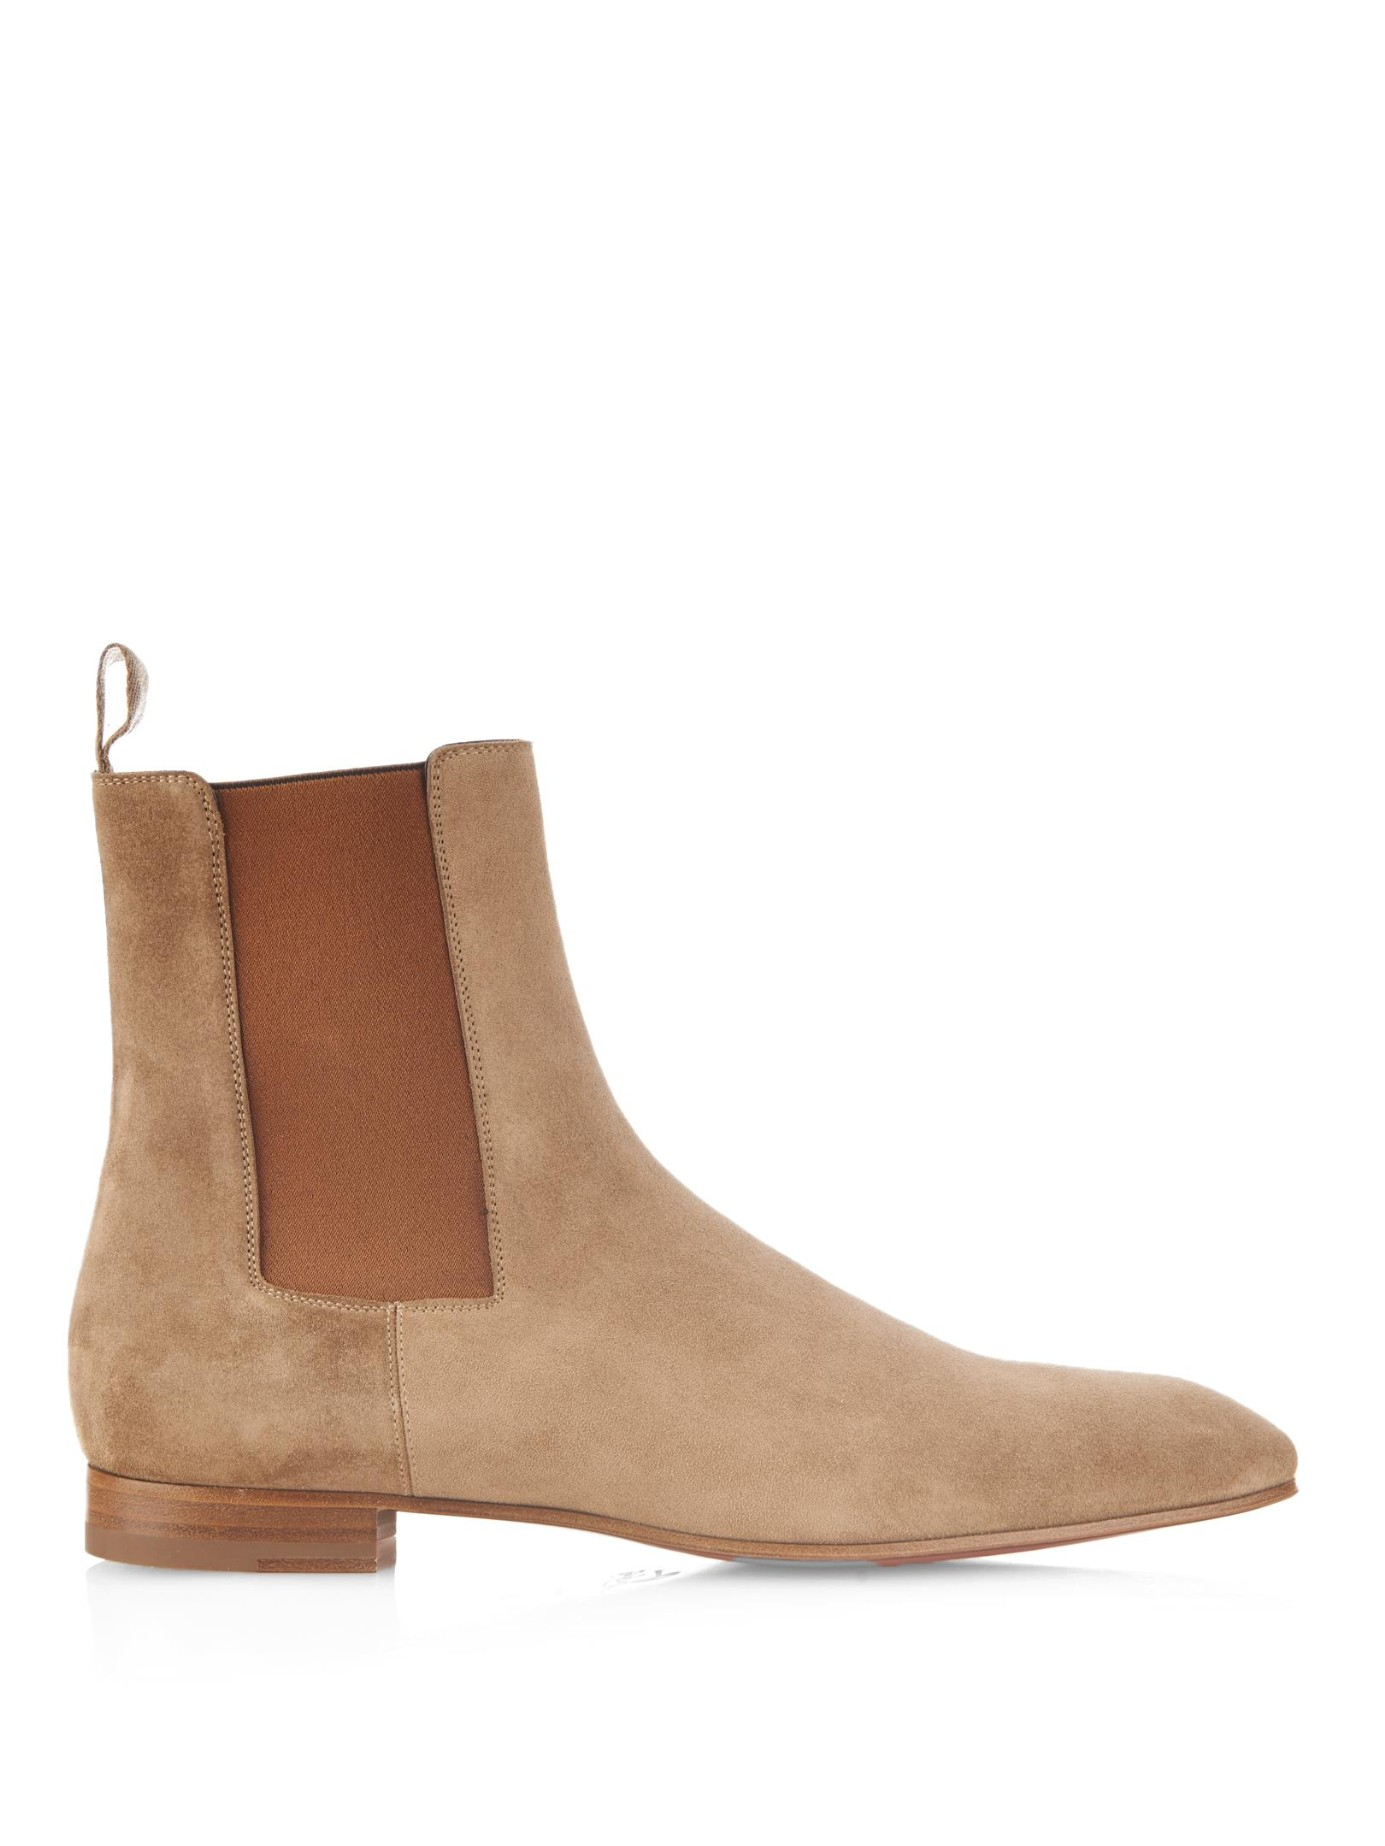 Christian Louboutin Roadie Suede Boots in Camel (Natural) for Men - Lyst